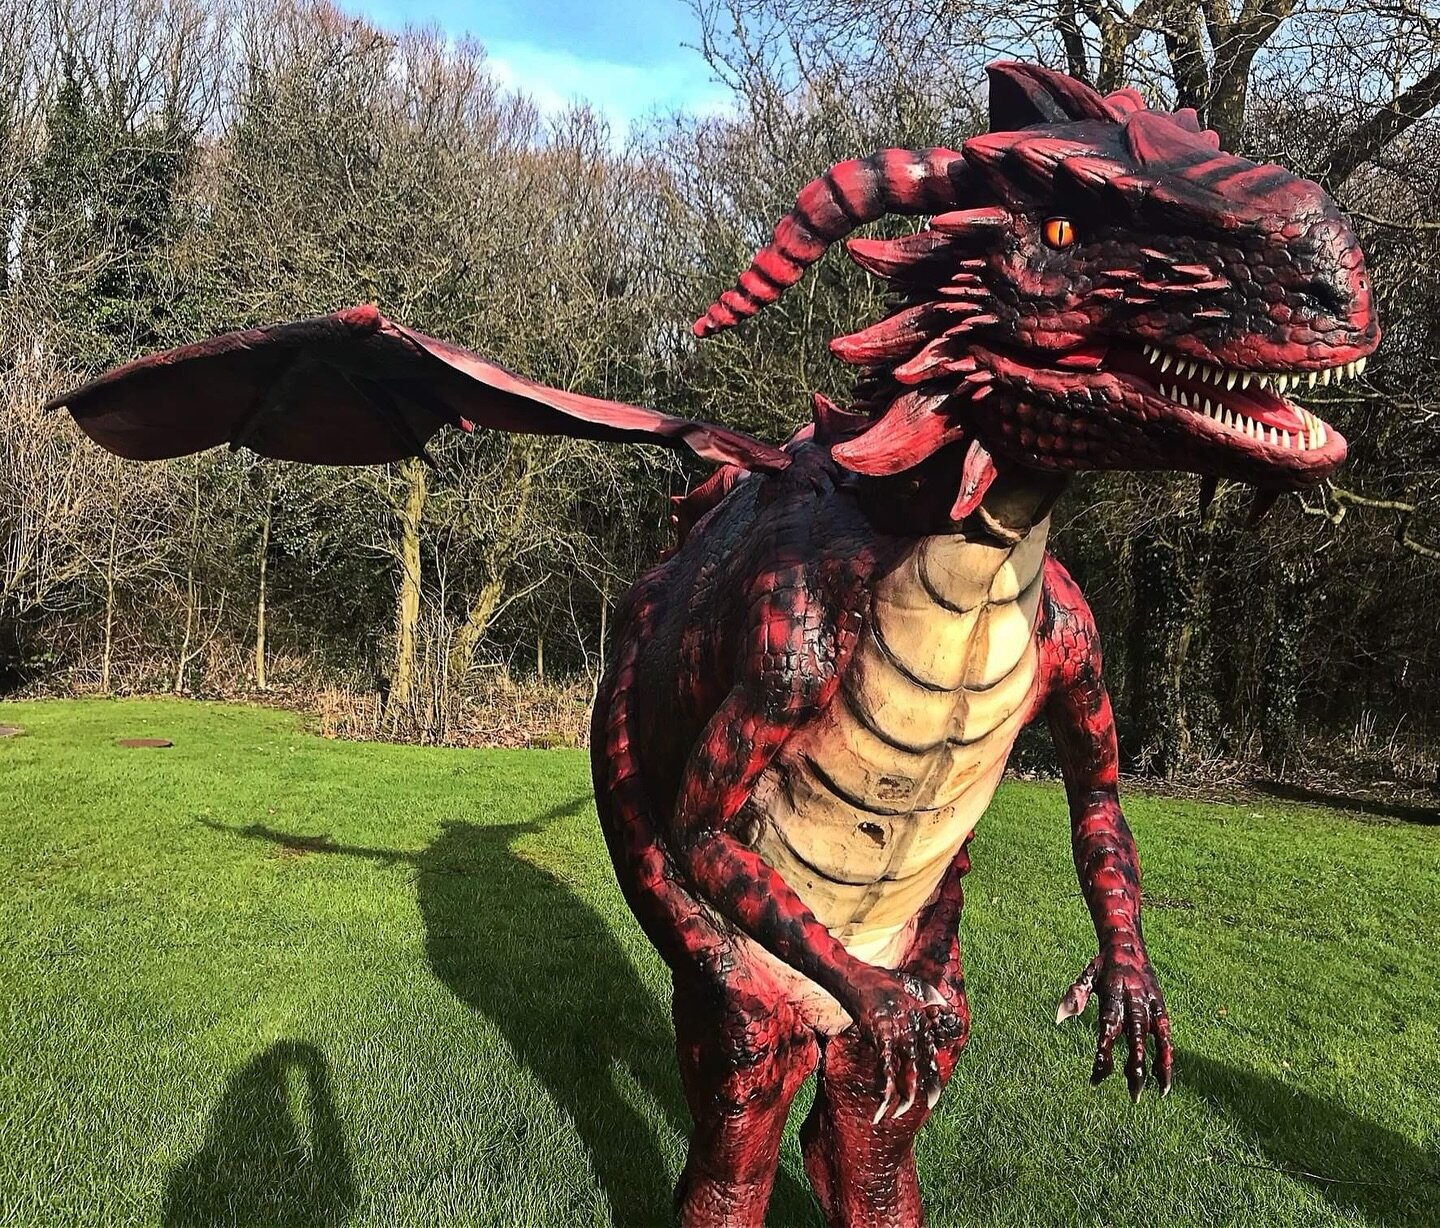 FREE EVENT TO CELEBRATE ST DAVID&rsquo;S DAY AT @mermaidquay !🏴󠁧󠁢󠁷󠁬󠁳󠁿

Visit The Link In Our Bio To Find Out More!🔗

#stdavidsday #mermaidquay #cardiff #cardiffbay #dragon #dreygo #cymru #wales #thingstodo #culturecardiff